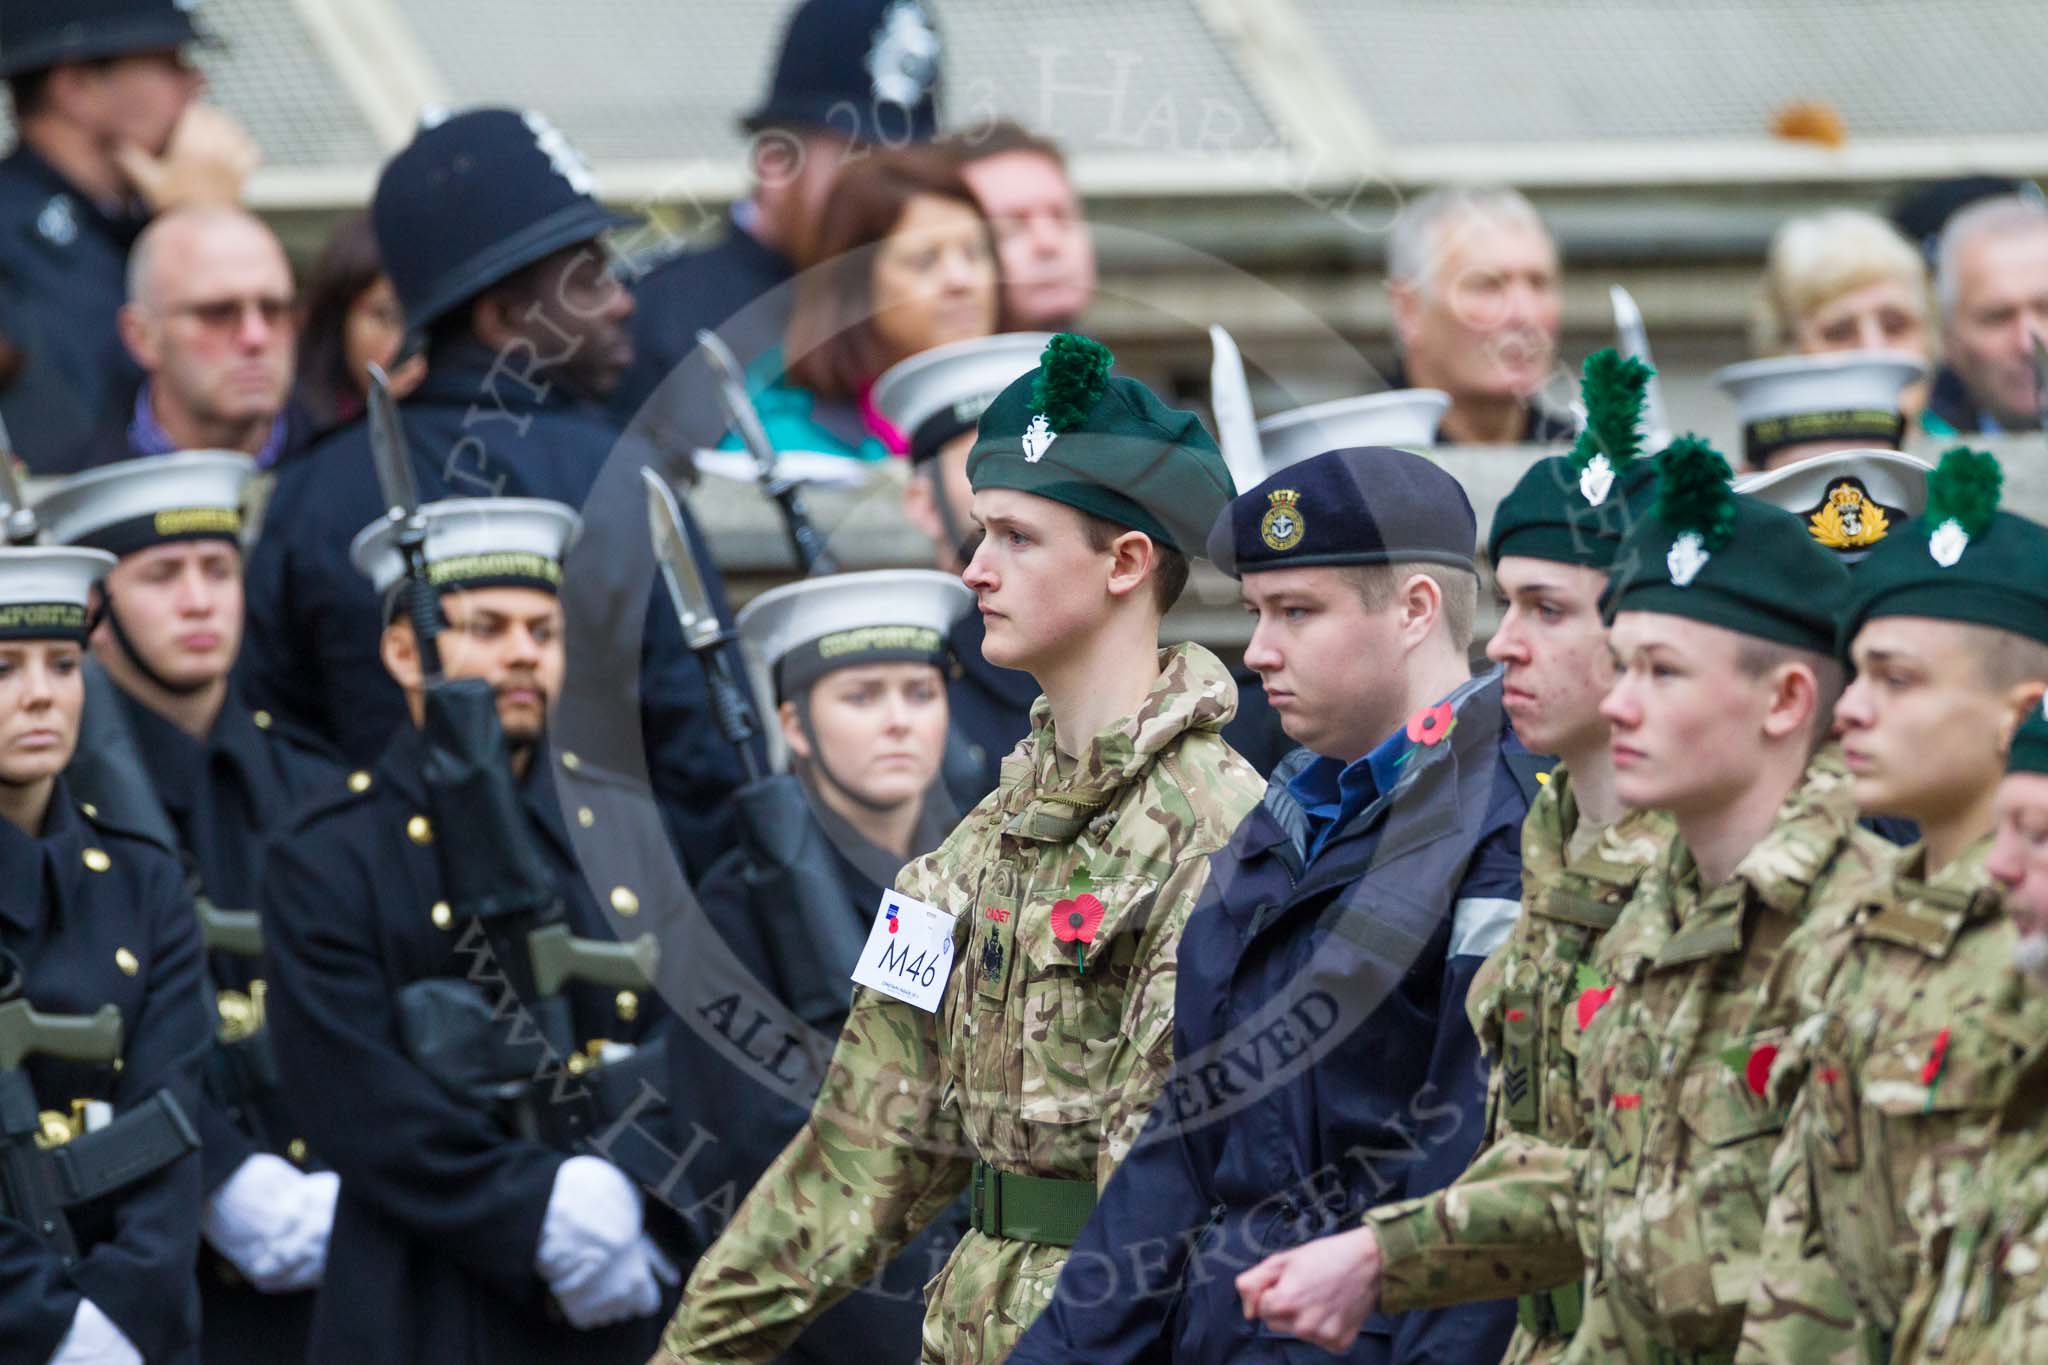 Remembrance Sunday at the Cenotaph 2015: Group M46, Sea Cadet Corps.
Cenotaph, Whitehall, London SW1,
London,
Greater London,
United Kingdom,
on 08 November 2015 at 12:20, image #1691